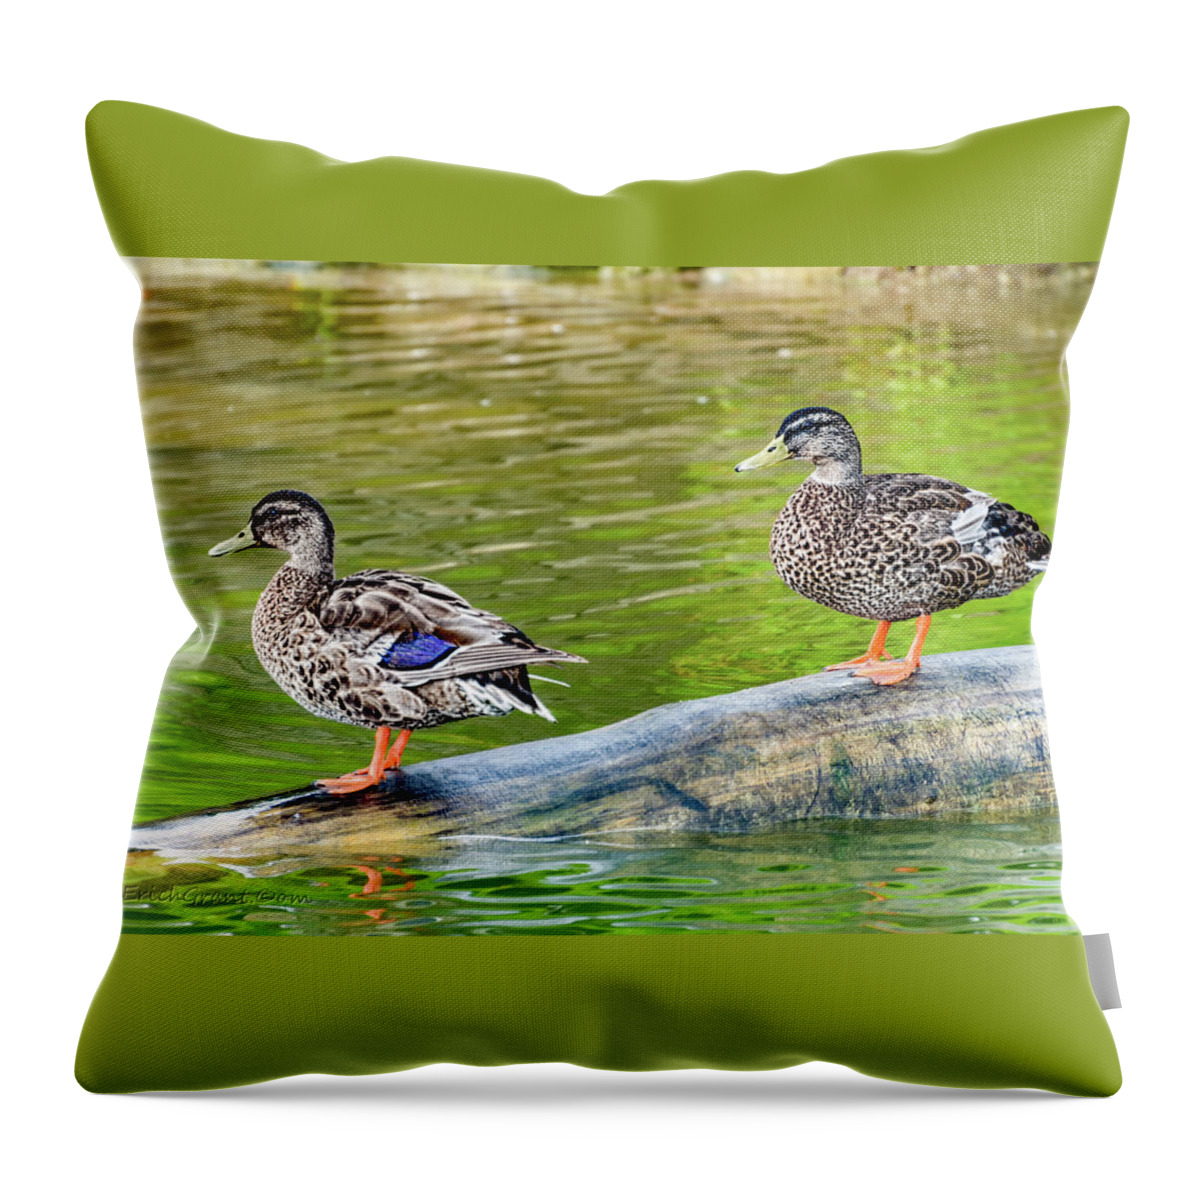 Texas Throw Pillow featuring the photograph Duck Duck by Erich Grant